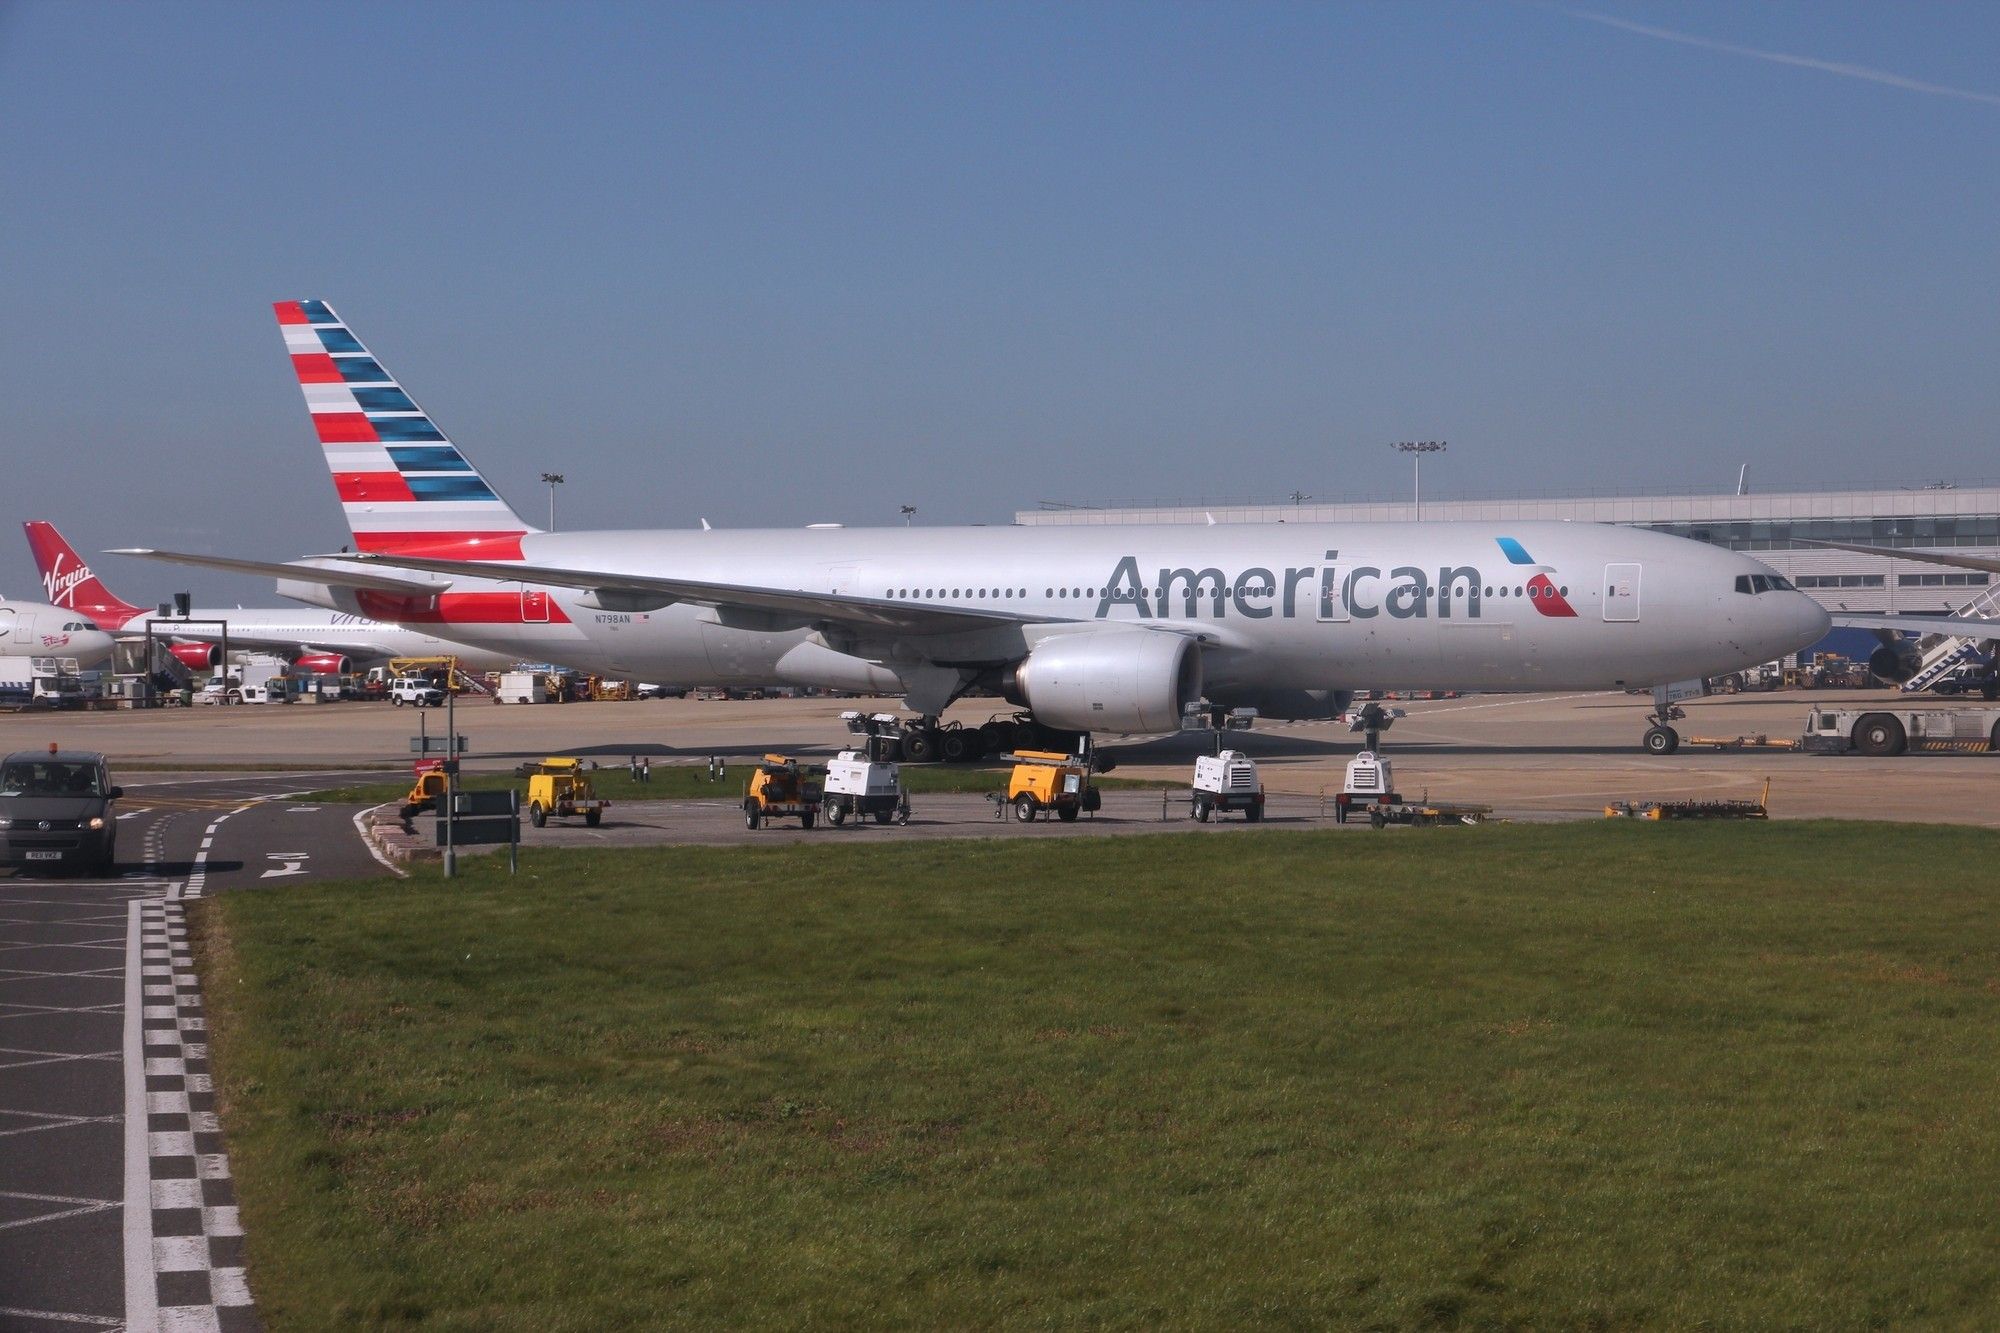 American Airlines Passengers Seek Cert. in Refund Policy Class Action